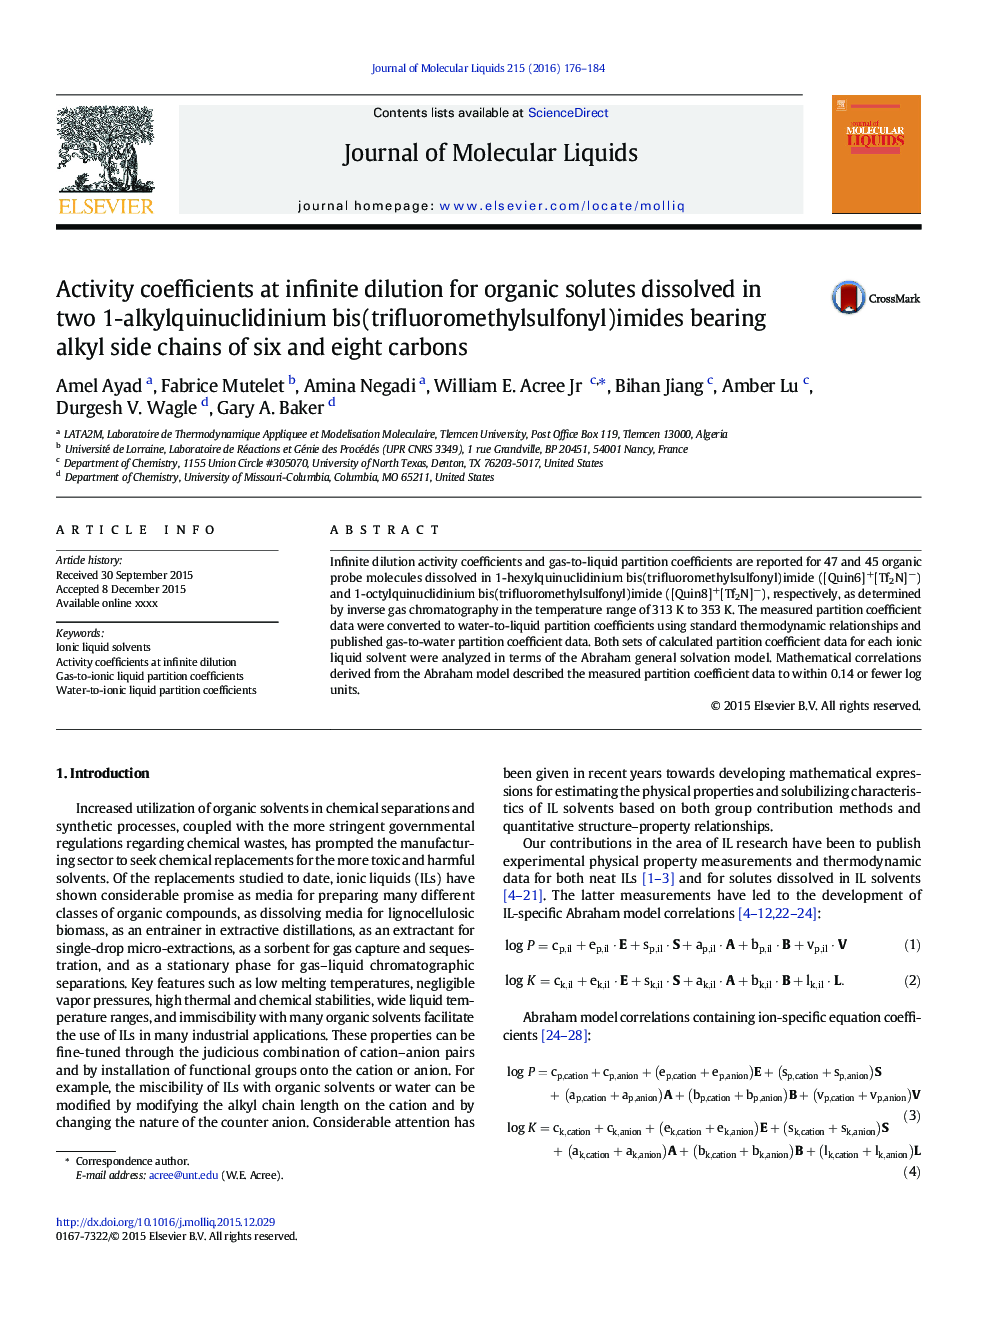 Activity coefficients at infinite dilution for organic solutes dissolved in two 1-alkylquinuclidinium bis(trifluoromethylsulfonyl)imides bearing alkyl side chains of six and eight carbons